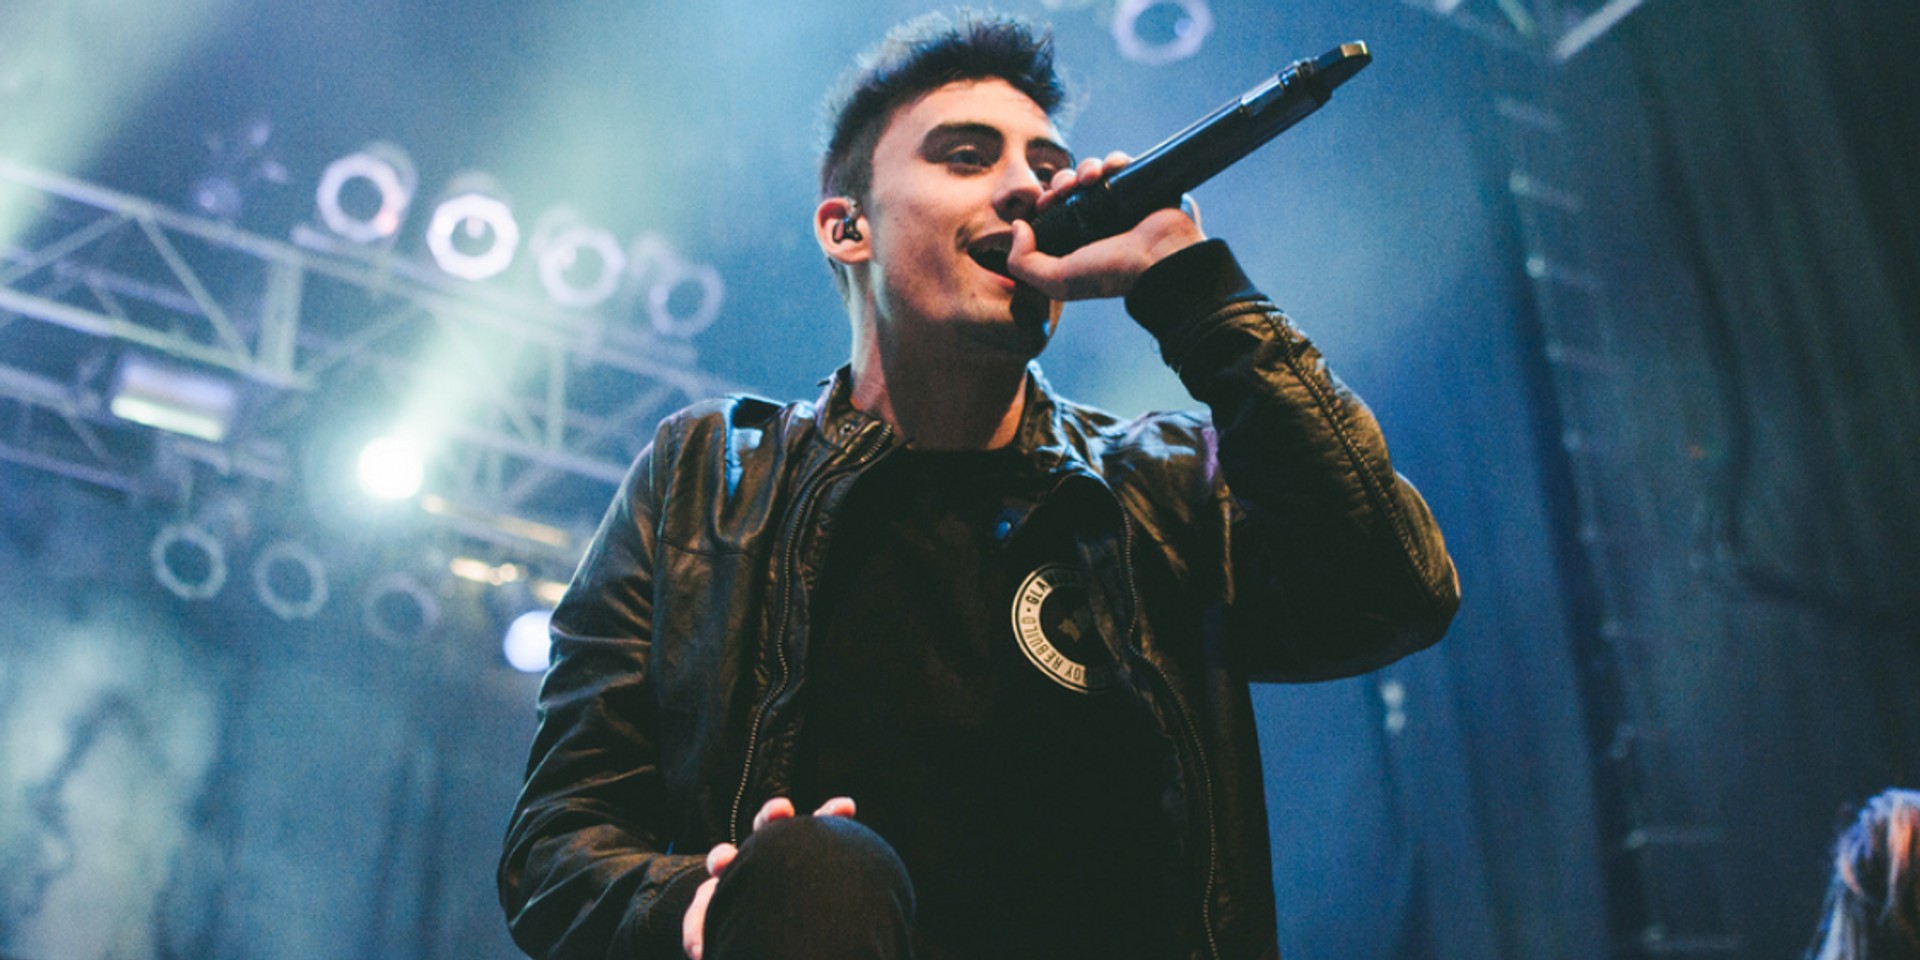 We Came As Romans vocalist Kyle Pavone passes away at 28 